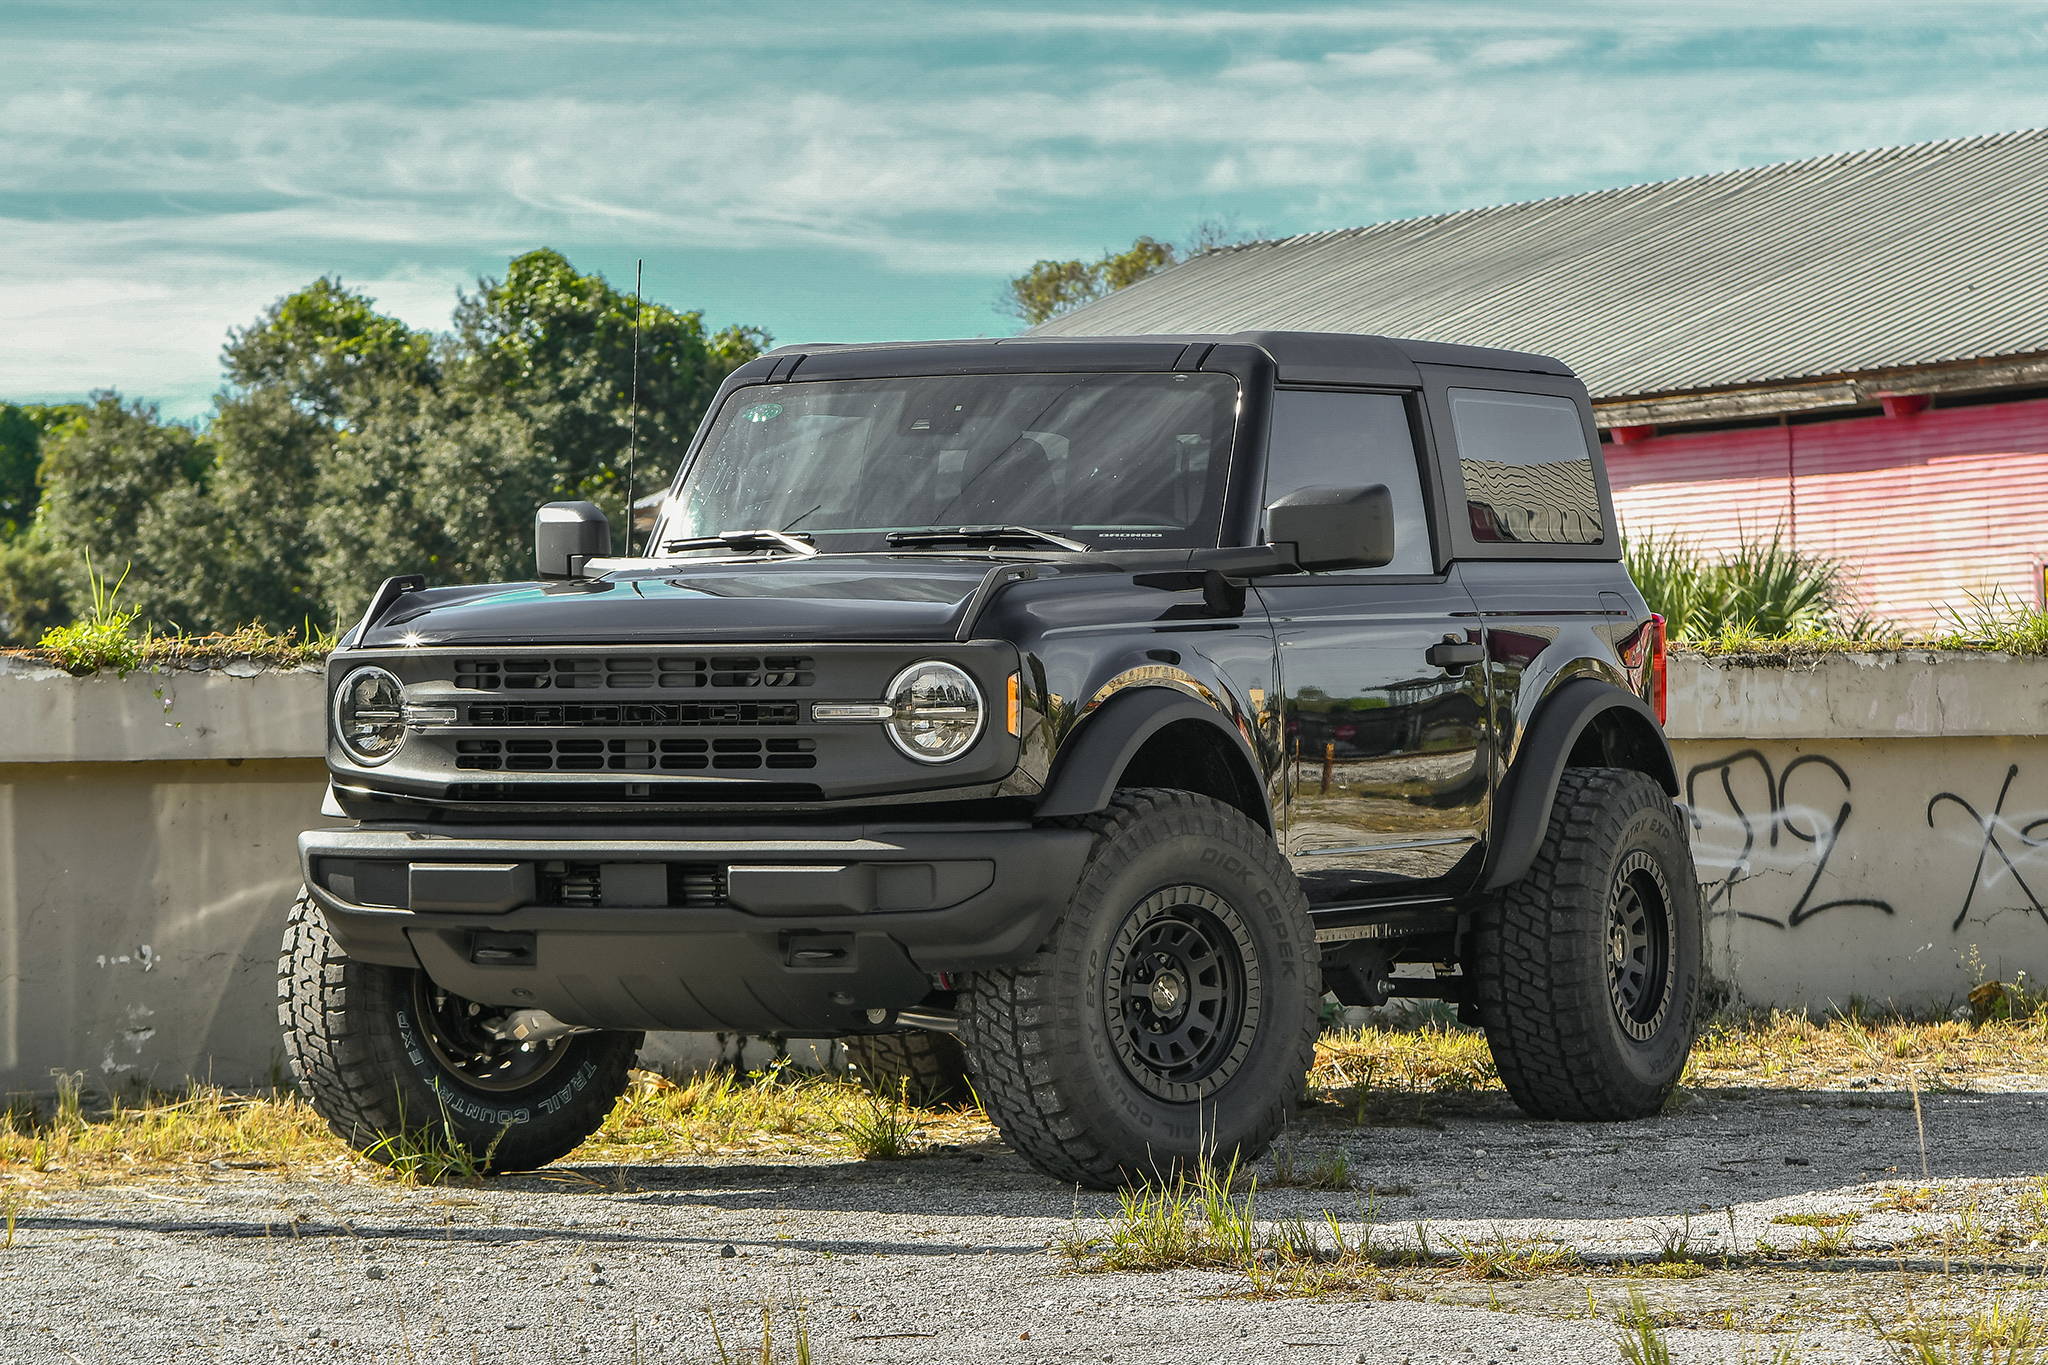 2021 FORD Bronco 2 Door Lifted with the HD Off-Road Overland Sector Venture Wheels in 17x9.0 in All Satin Black and Bronze